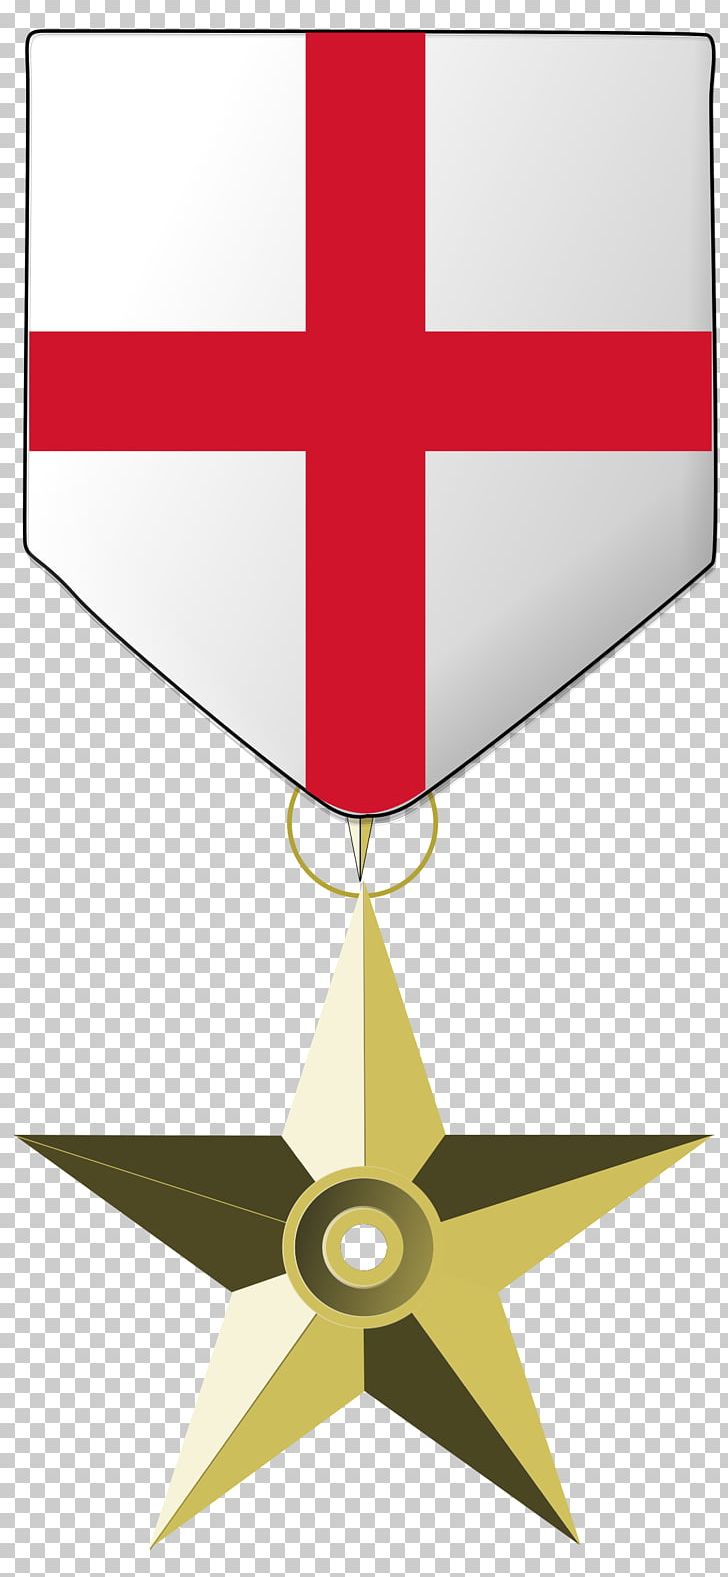 Socialist Heraldry Wikimedia Commons Wikimedia Foundation PNG, Clipart, Angle, Coat Of Arms, Cross, England, Heraldry Free PNG Download